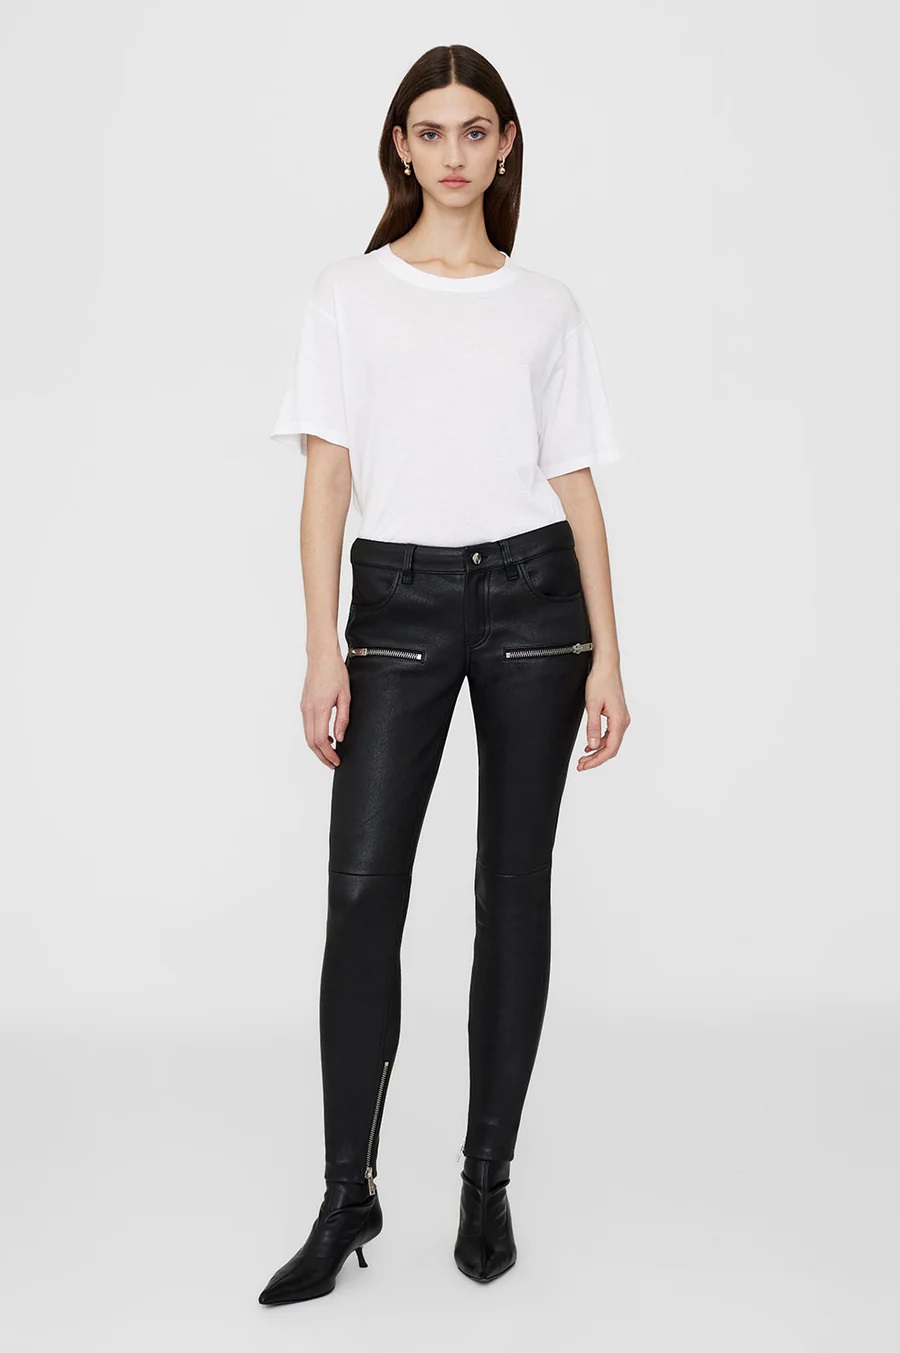 ANINE BING Remy Leather Pant in Black